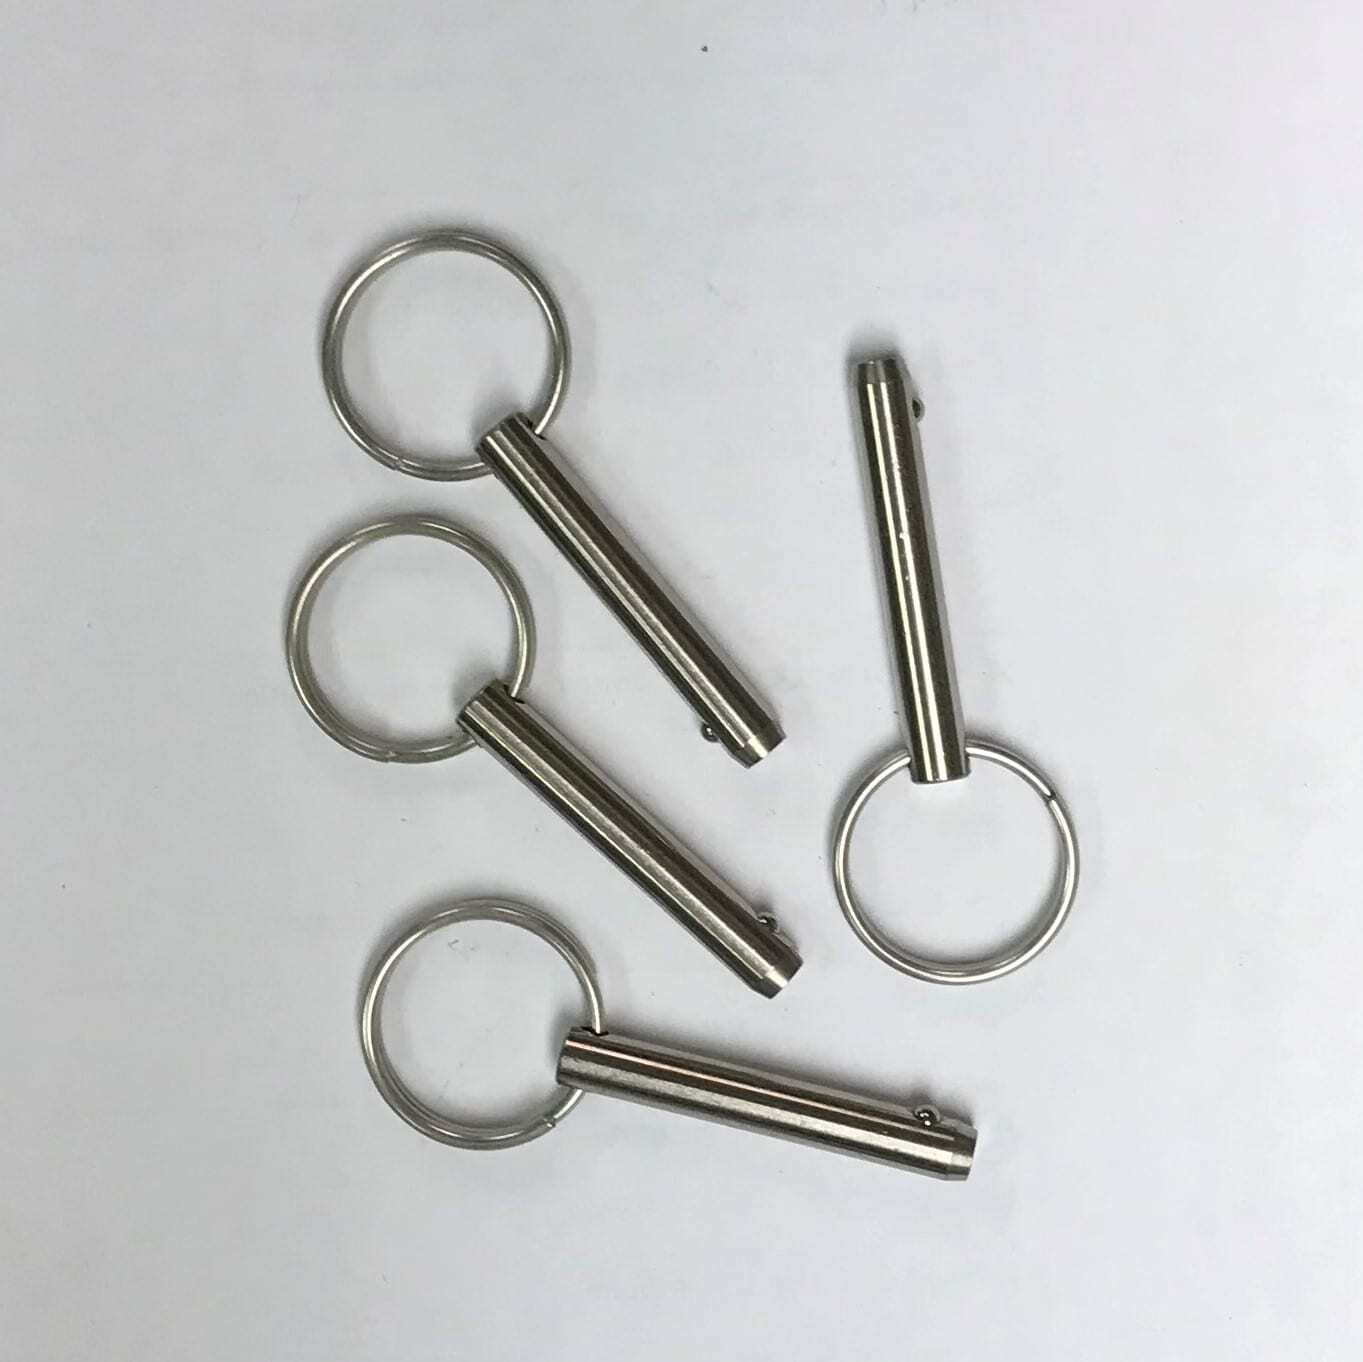 Grip Length Detent Ring Pins – Stainless Steel